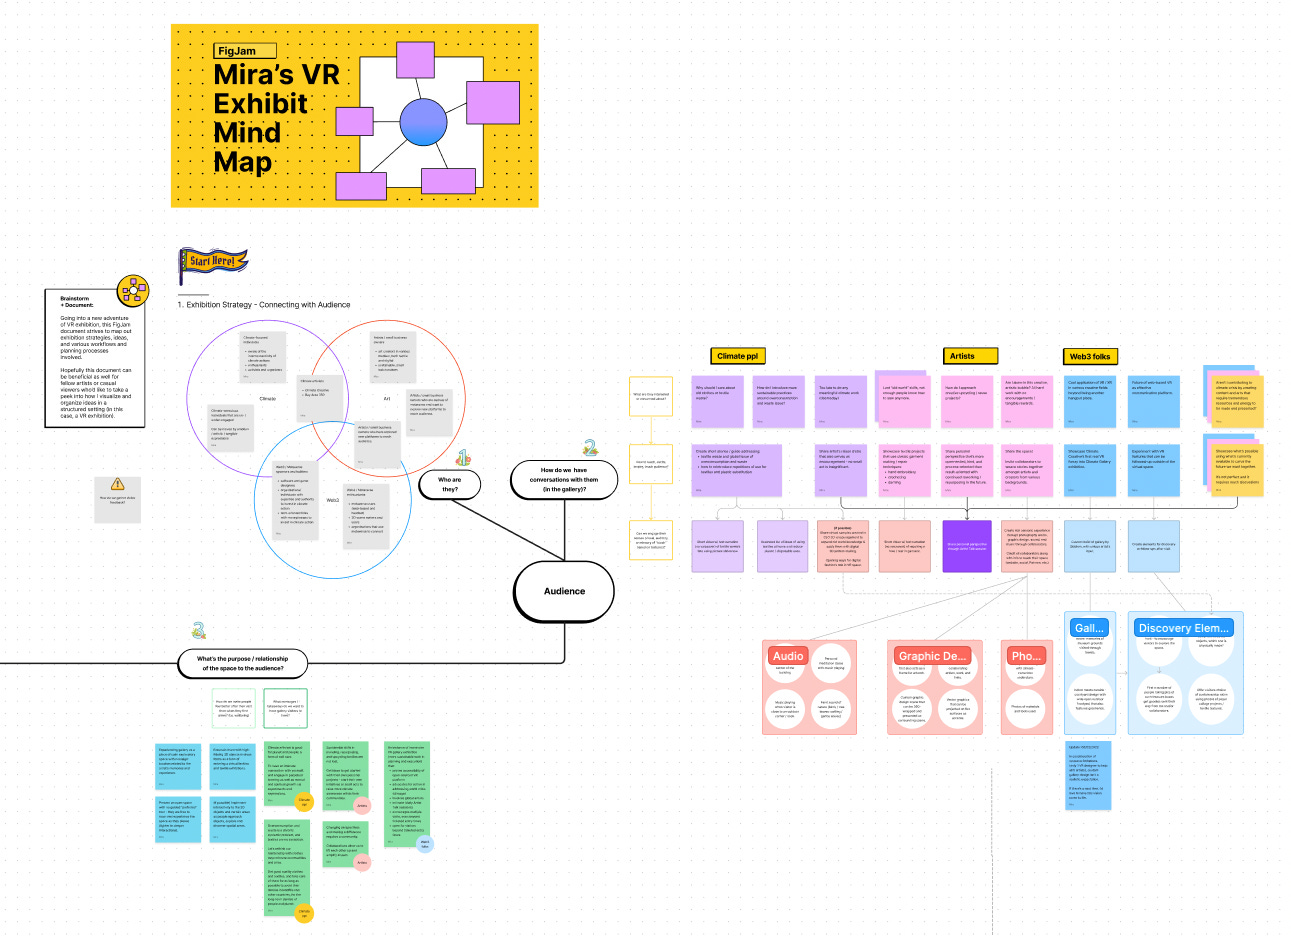 A portion of Mira's VR Exhibit Mind Map, a Figma Jam document.